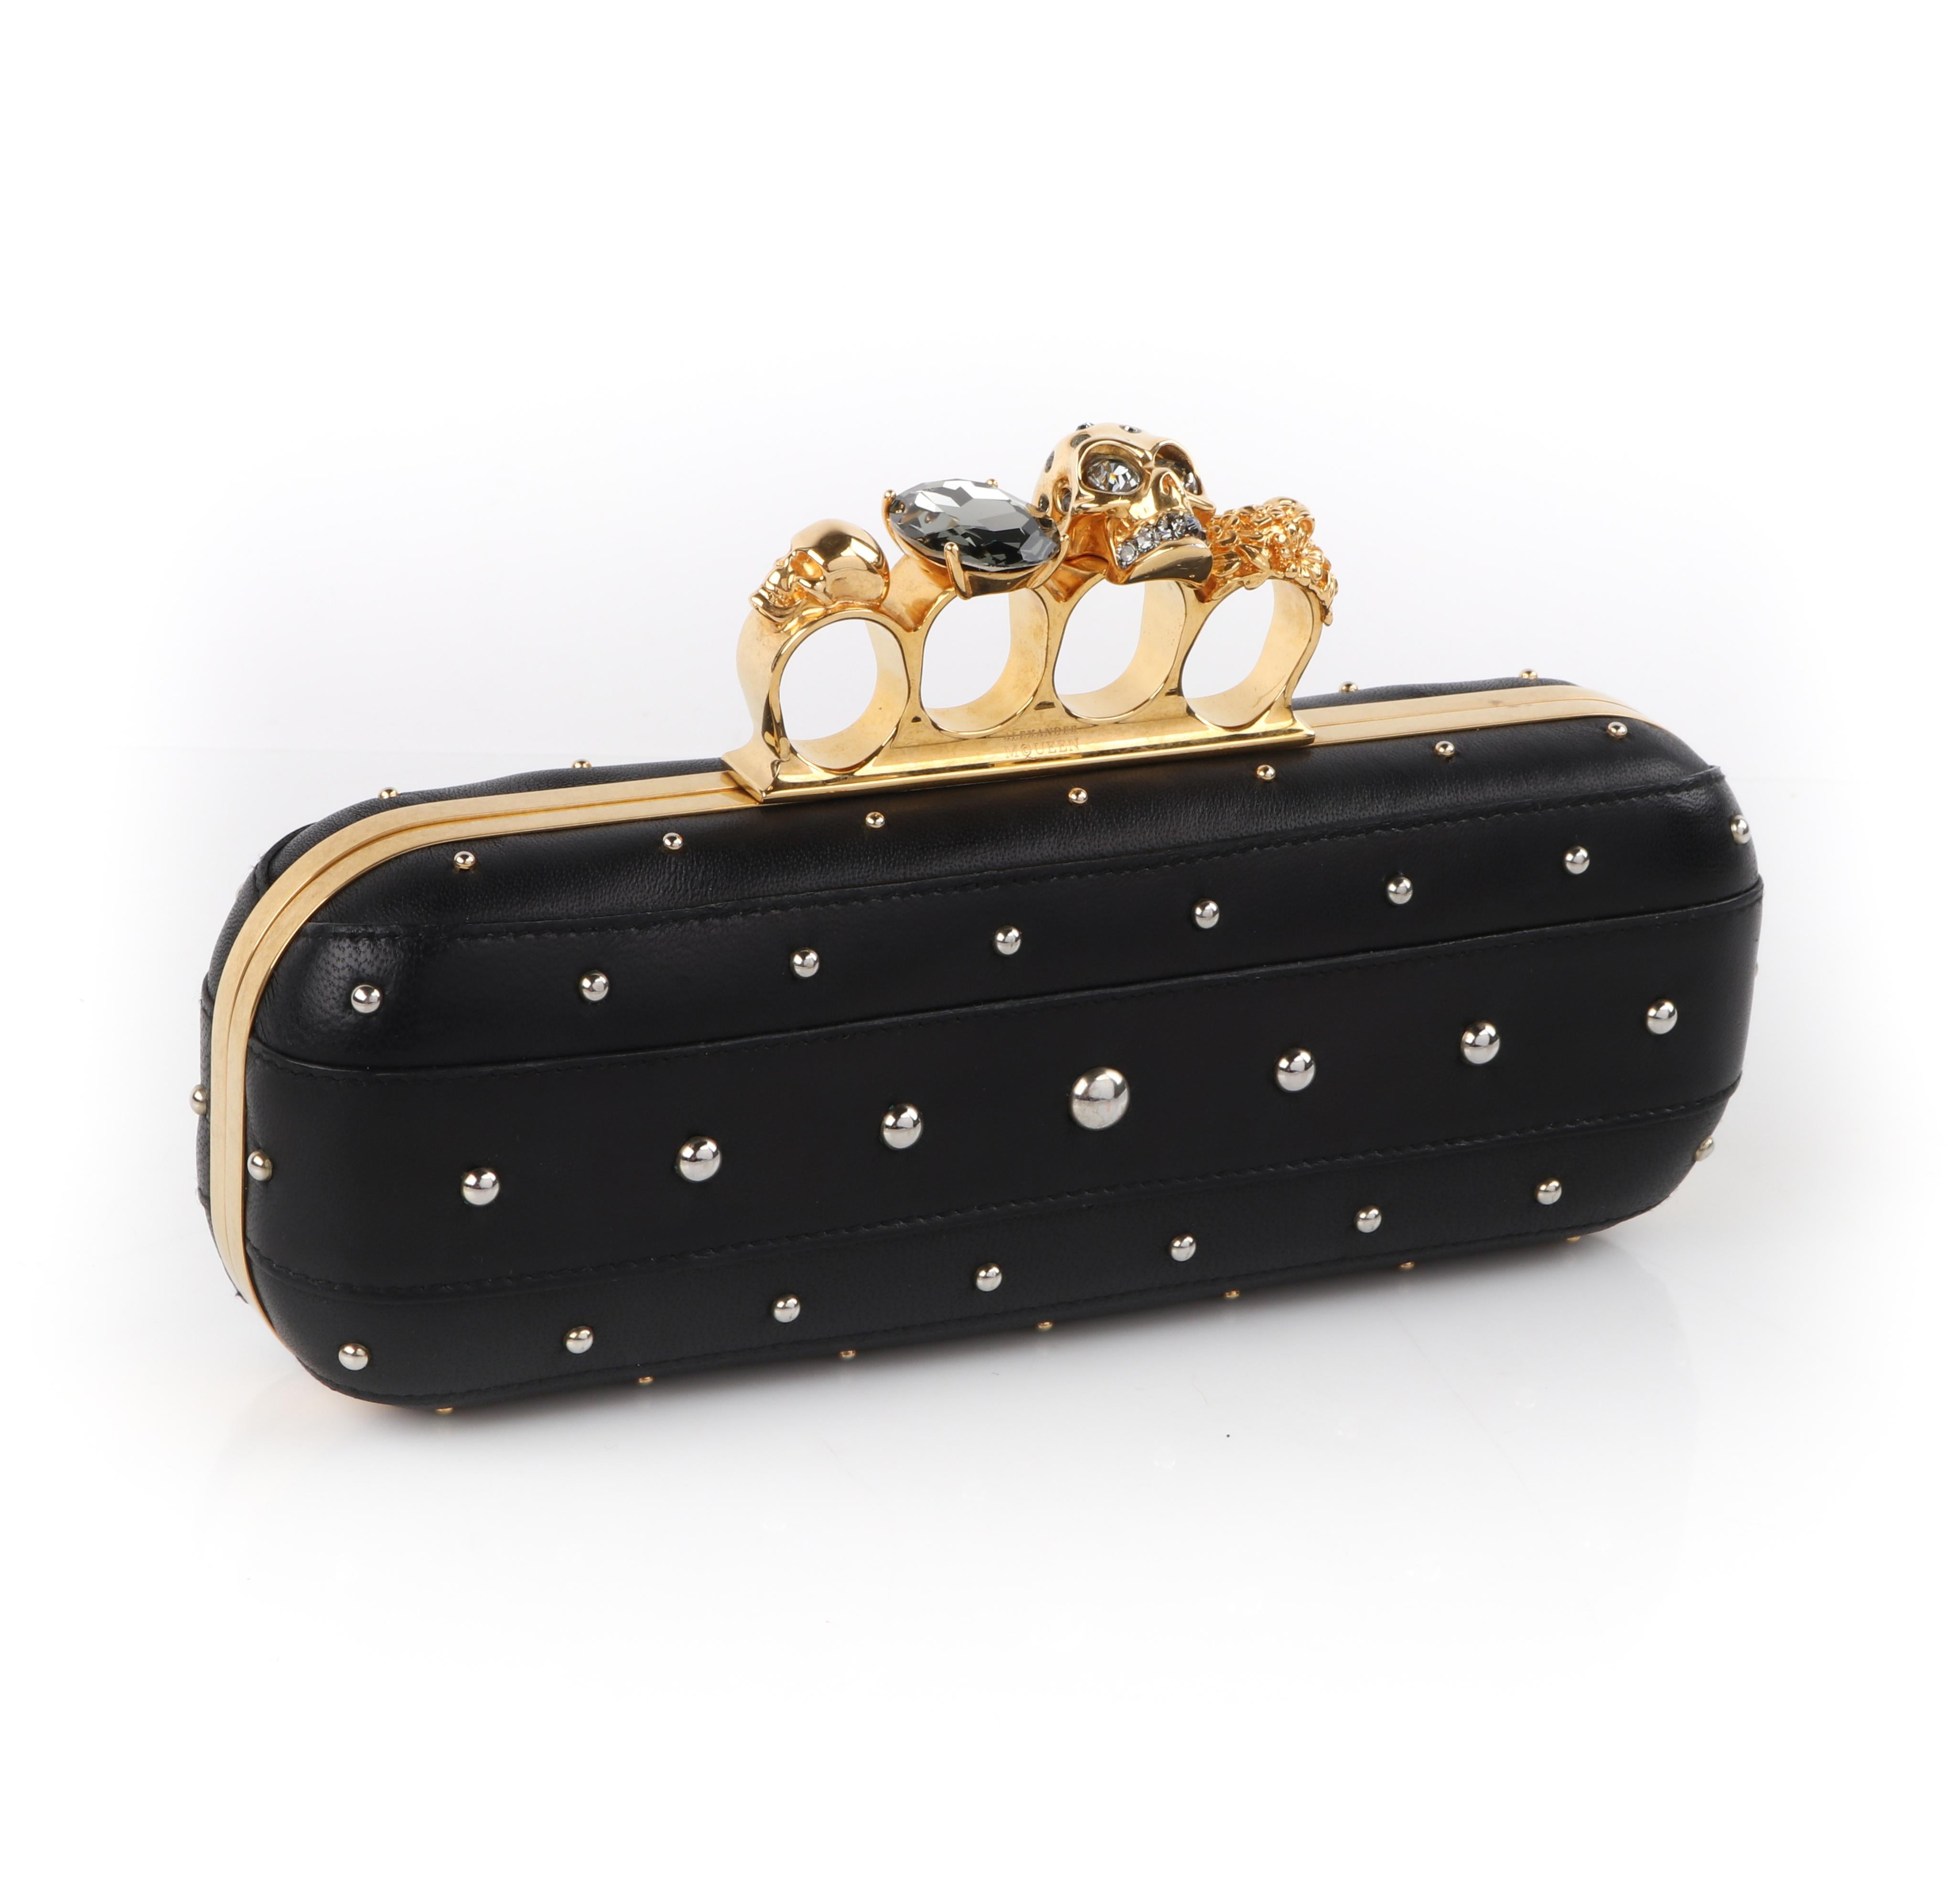 Brand / Manufacturer: Alexander McQueen 
Collection: F/W 2013
Designer: Sarah Burton
Manufacturer Style Name: Skull Four Ring Clutch
Style: Clutch Handbag
Color(s): Shades of black, gold
Lined: Yes
Unmarked Fabric Content (feel of): Leather